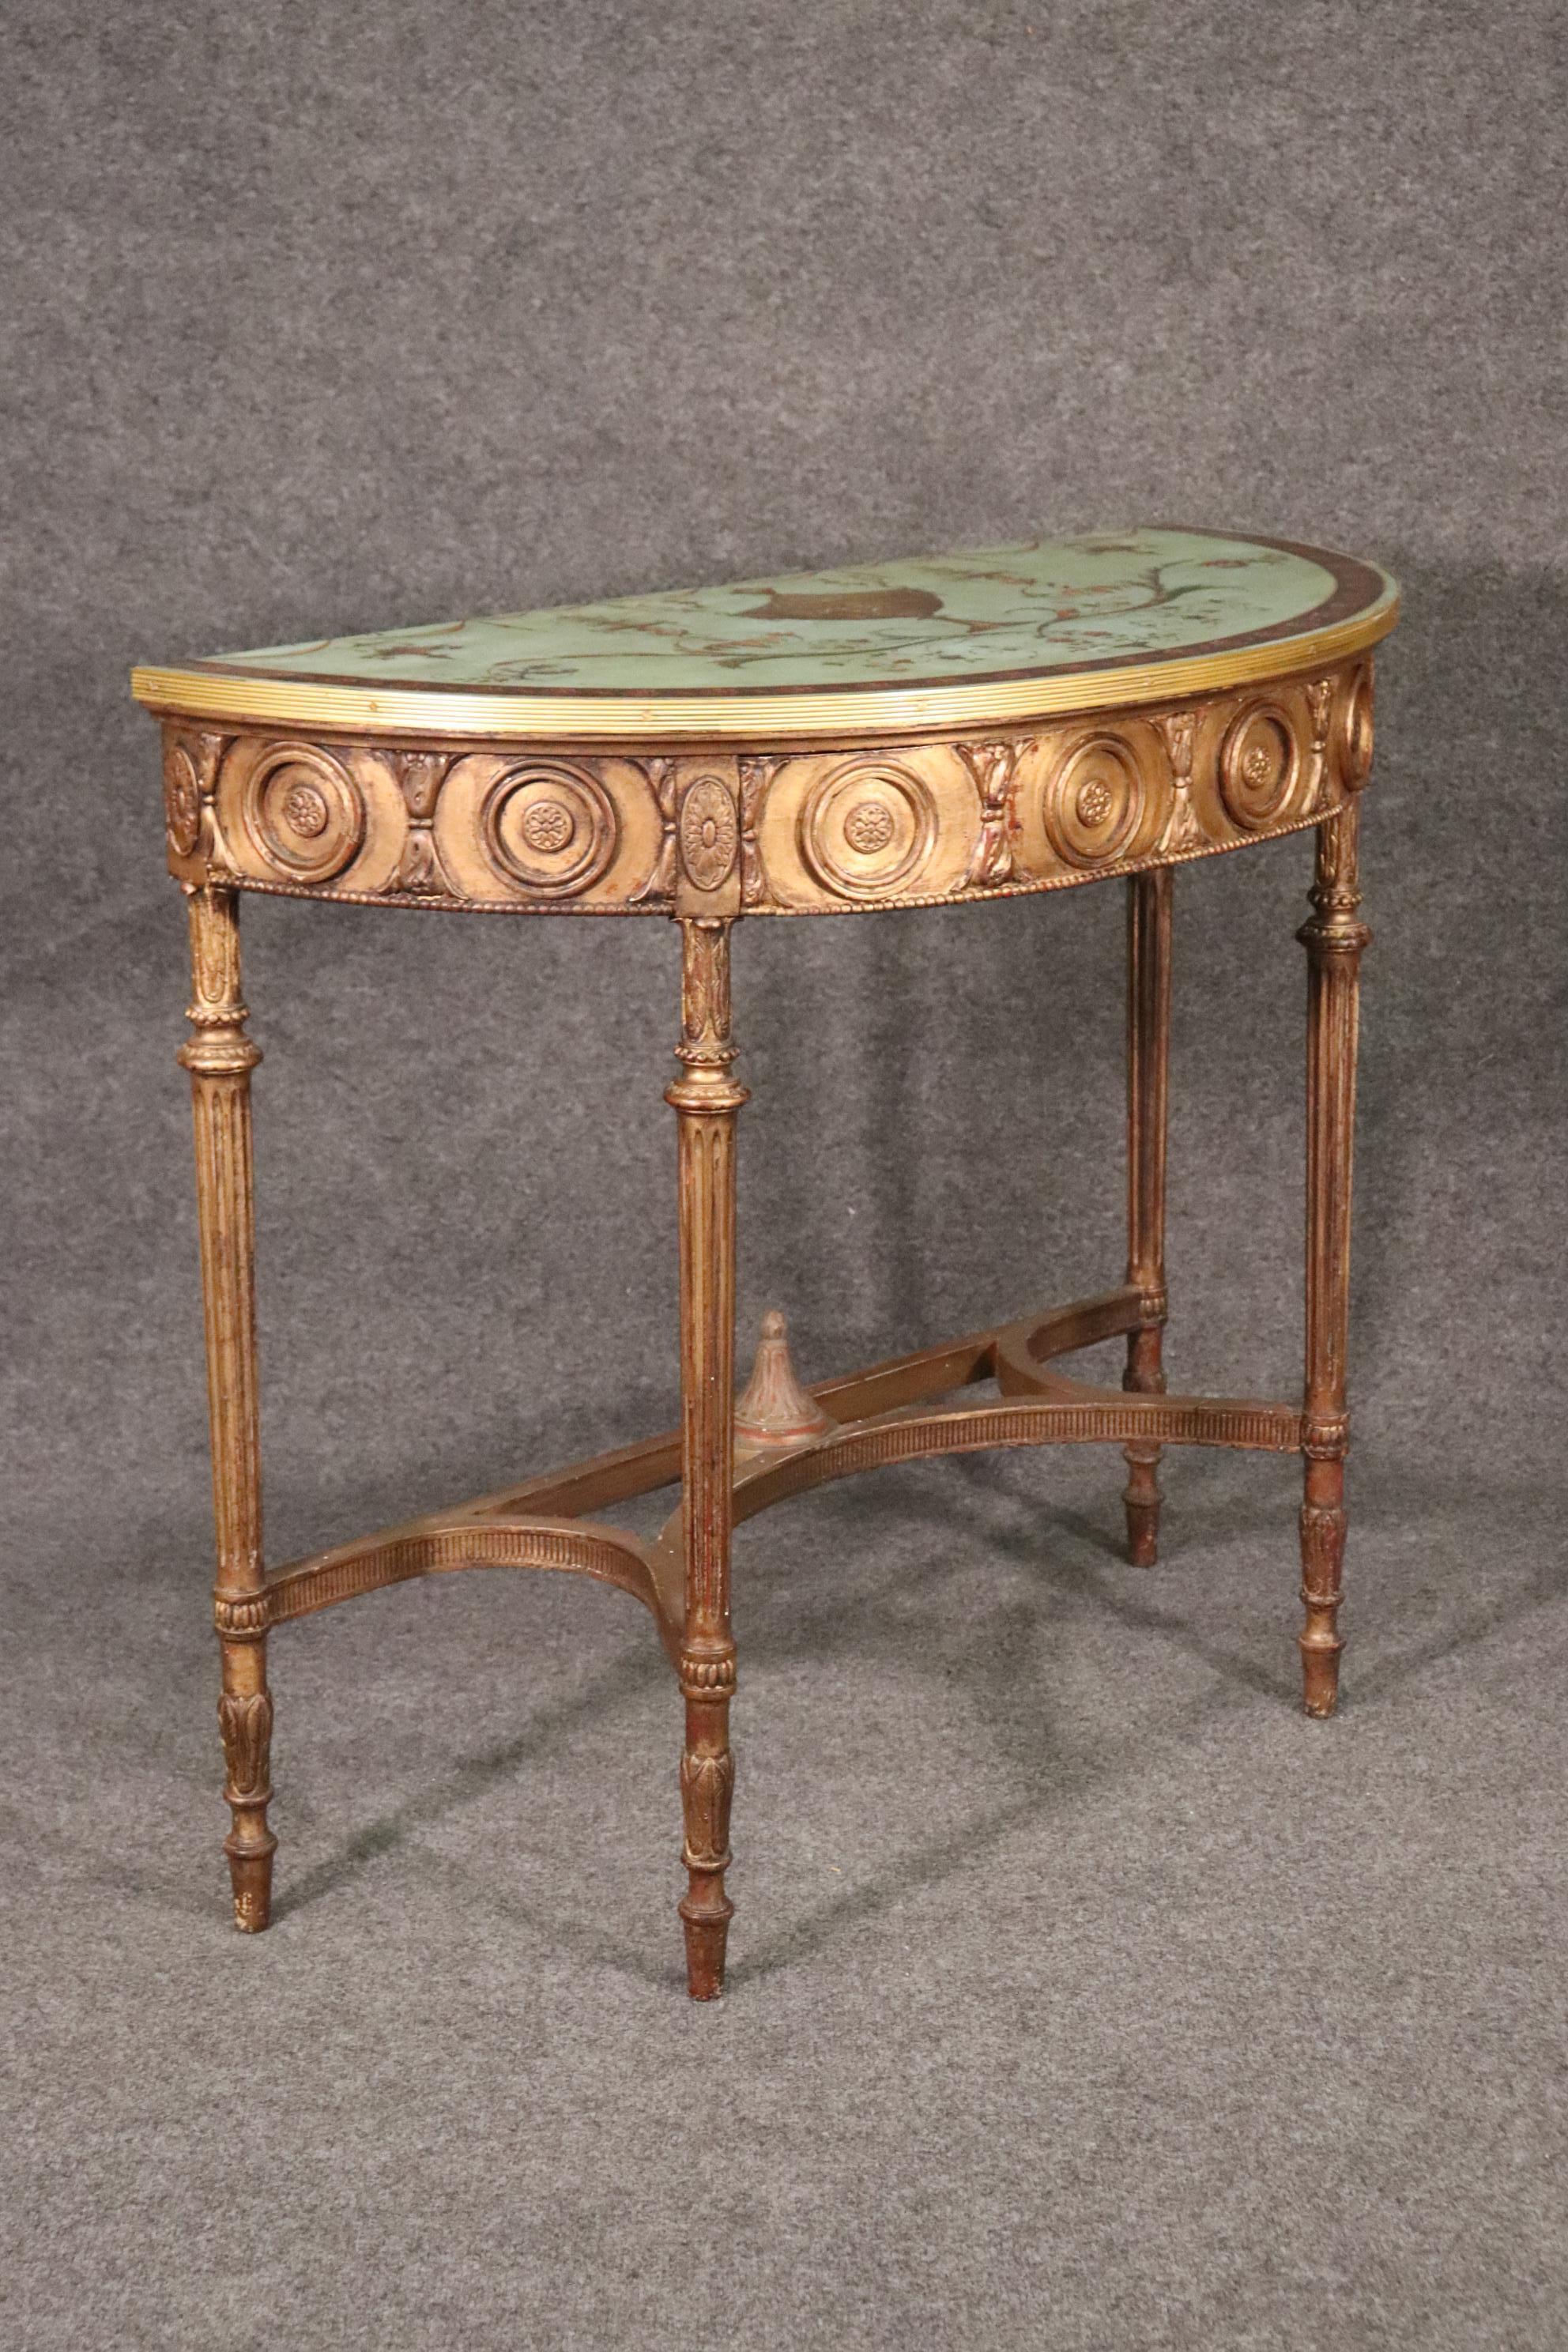 English Fine Quality Paint Decorated Gilded Adams Demilune Console Table, Circa 1890 For Sale